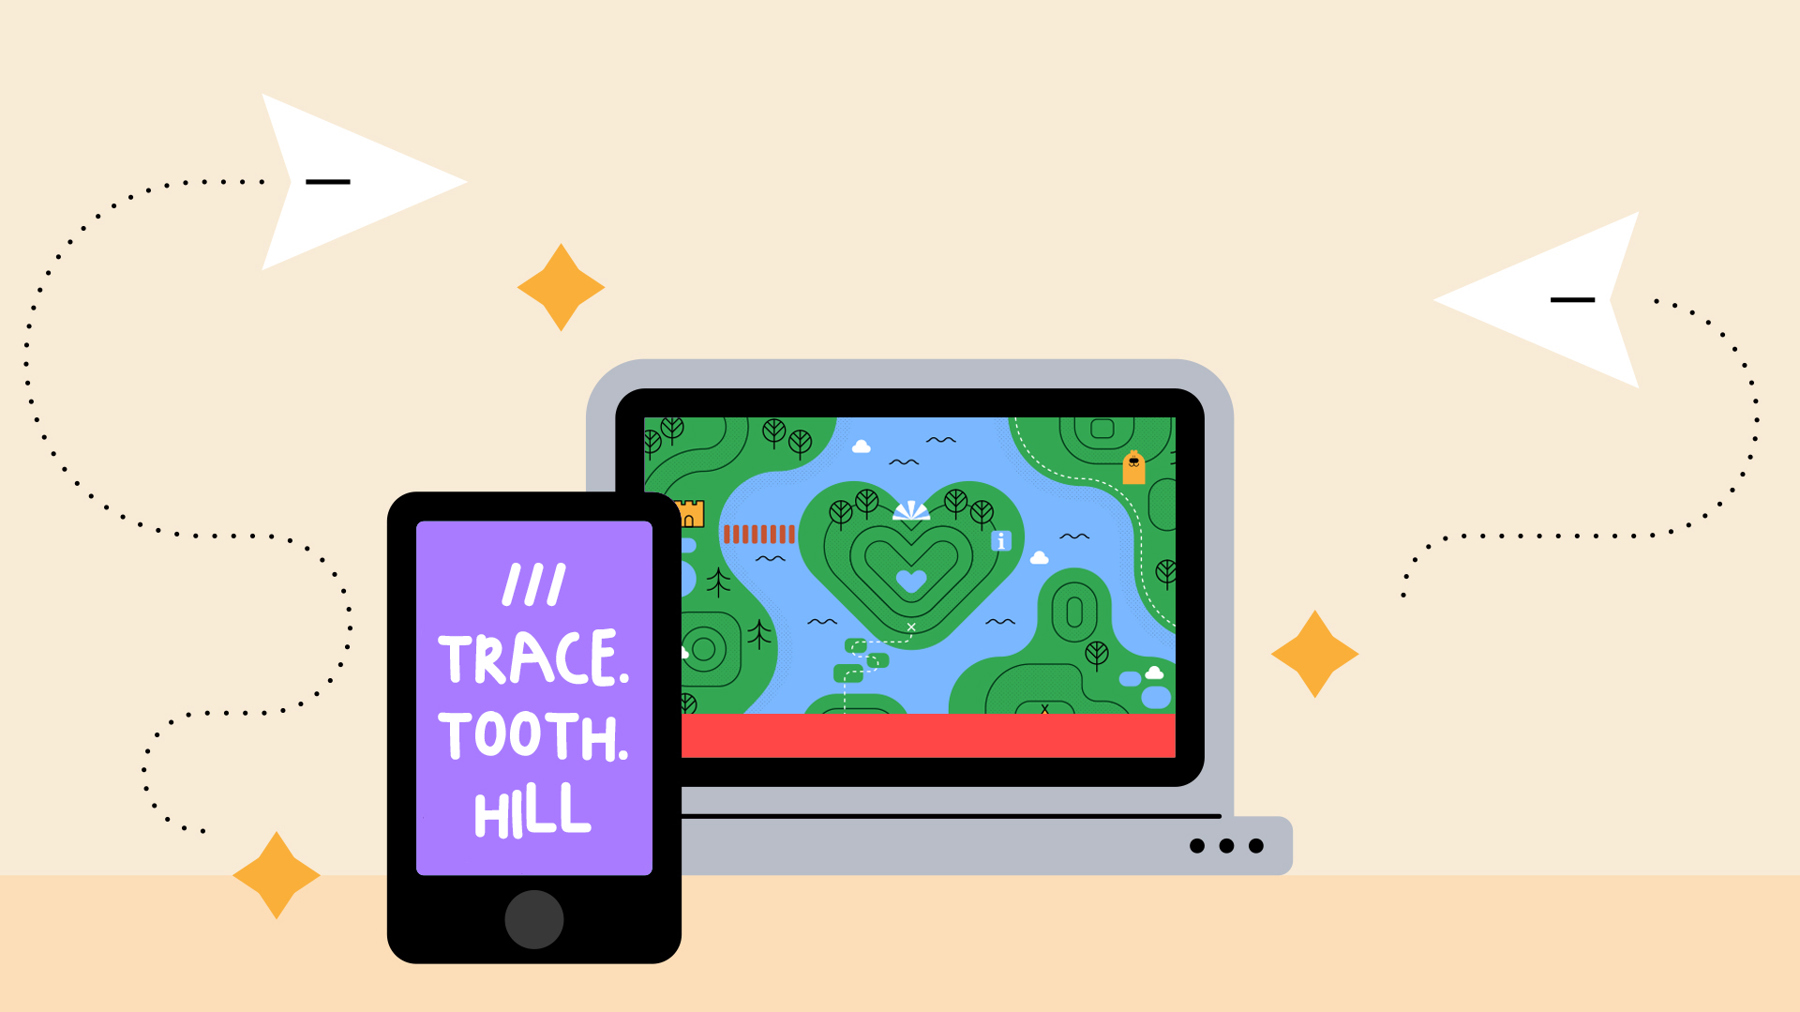 A laptop with an illustration of a heart-shaped woodland area. Leaning against the laptop is a smartphone, with the words ‘trace’, ‘tooth’ and ‘hill’ written on the screen.